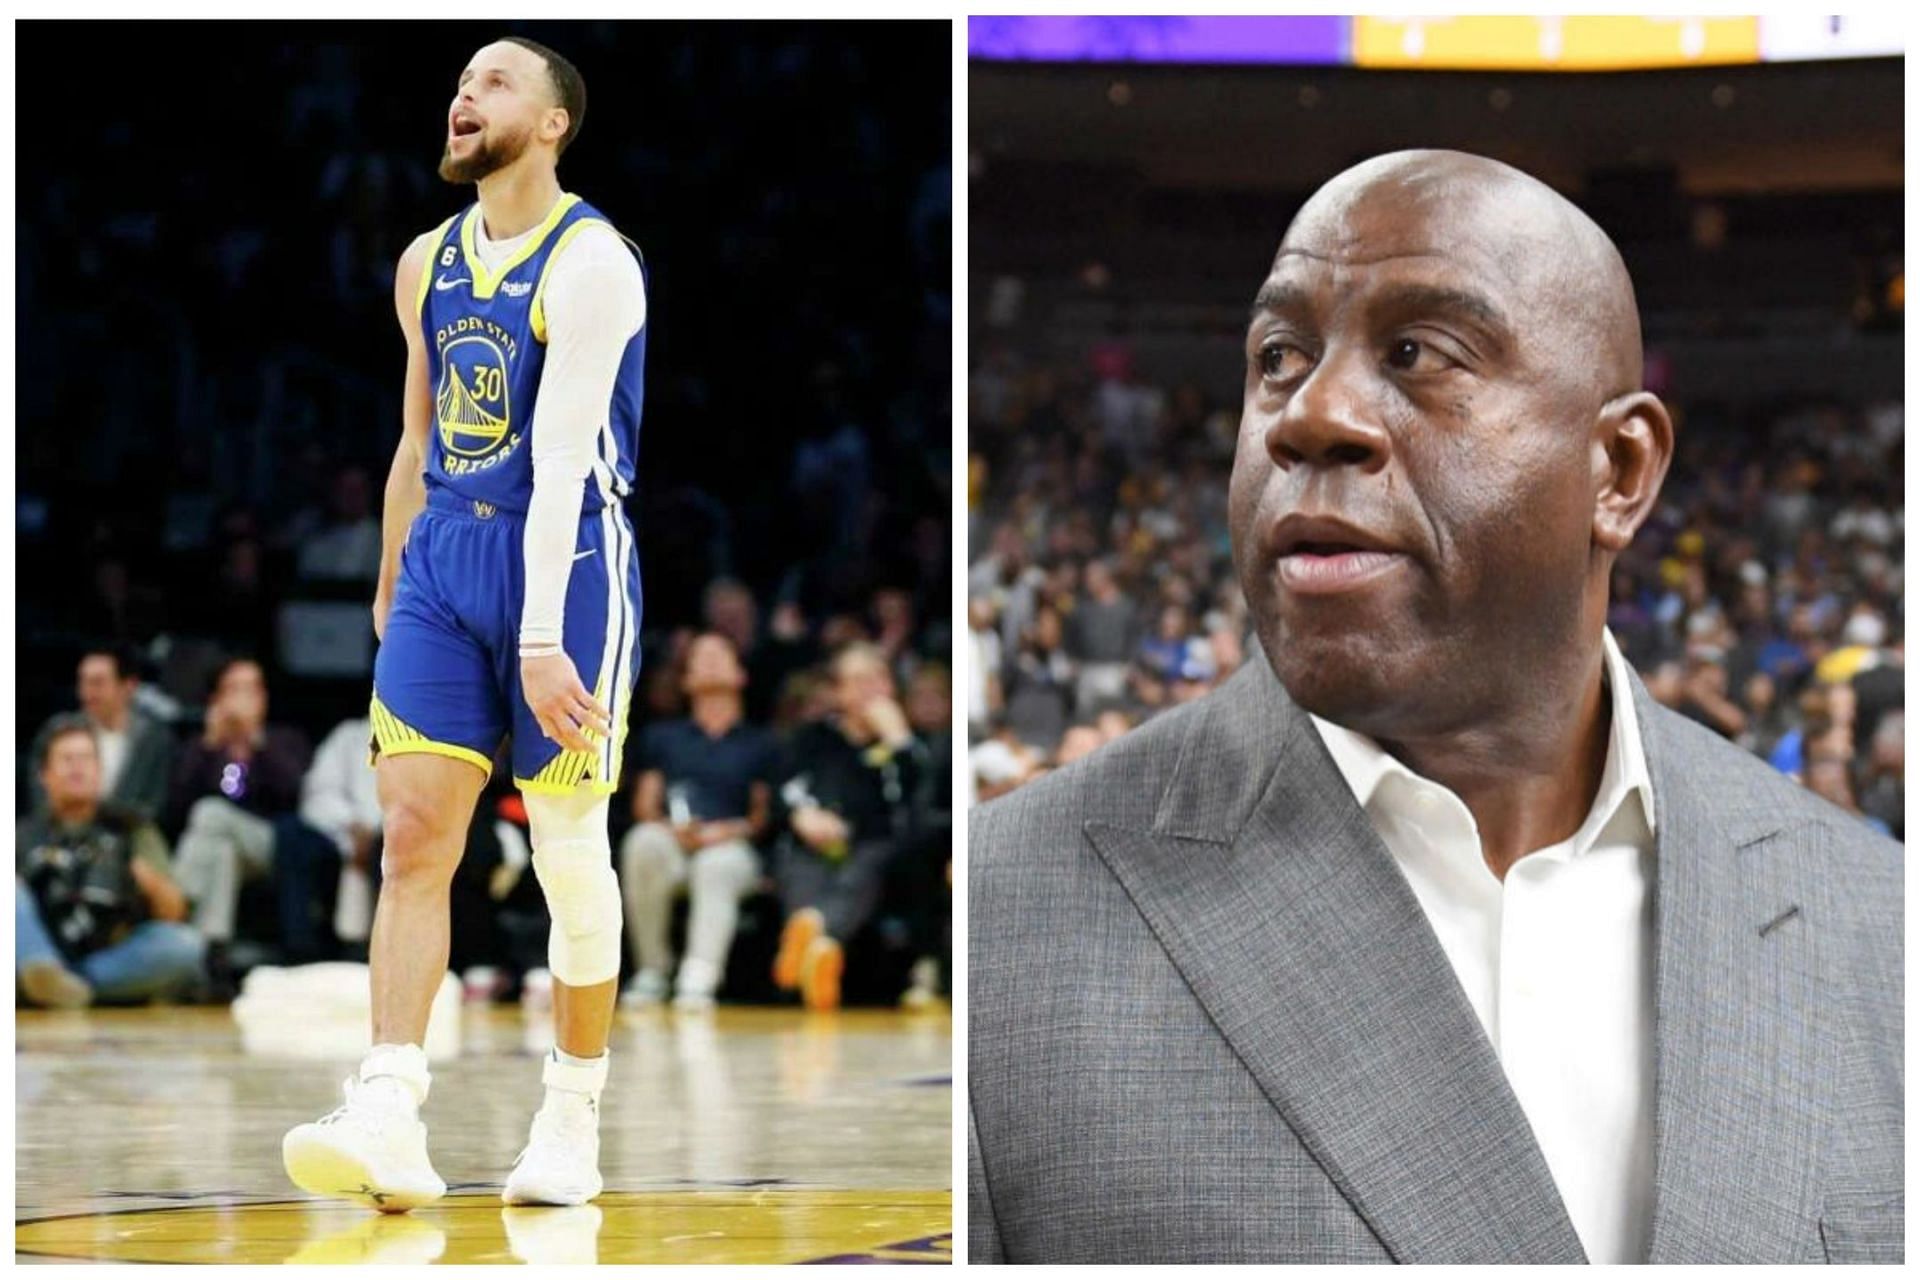 The debate beteween who the greatest point guard of all-time is between Steph Curry (left) and Magic Johnson (right) continues